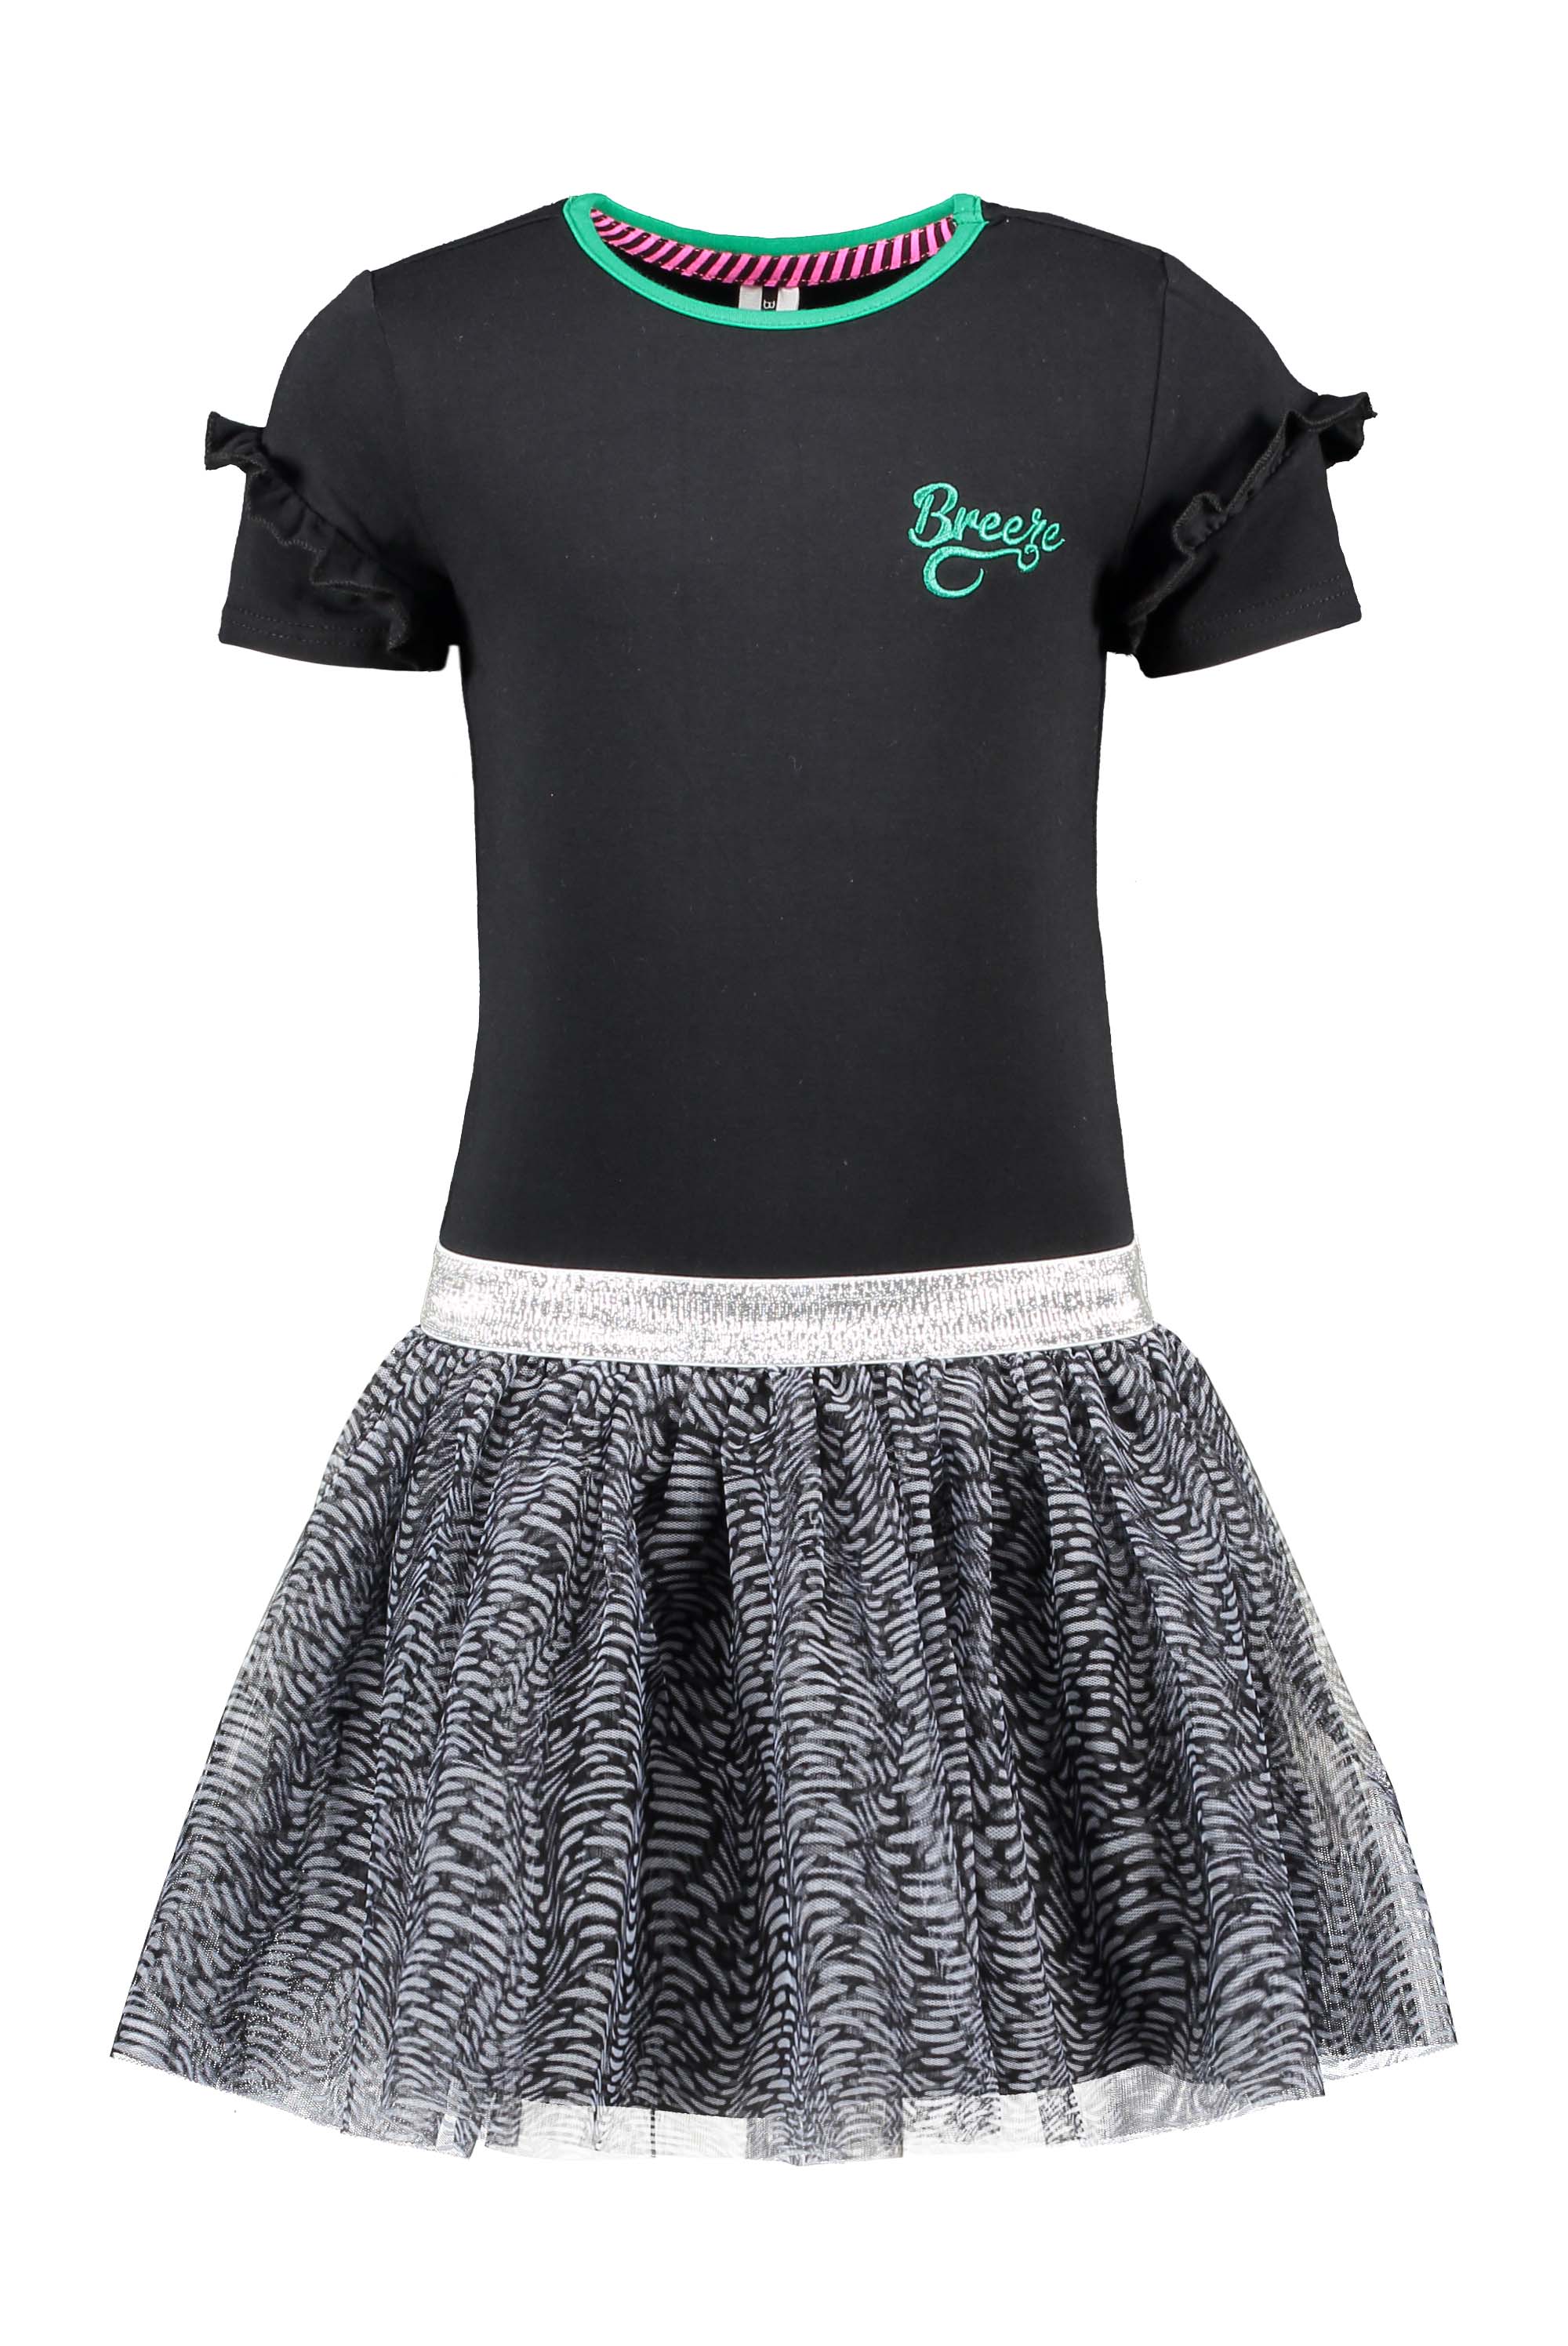 Girls dress with embroidery / plisse mesh skirt part